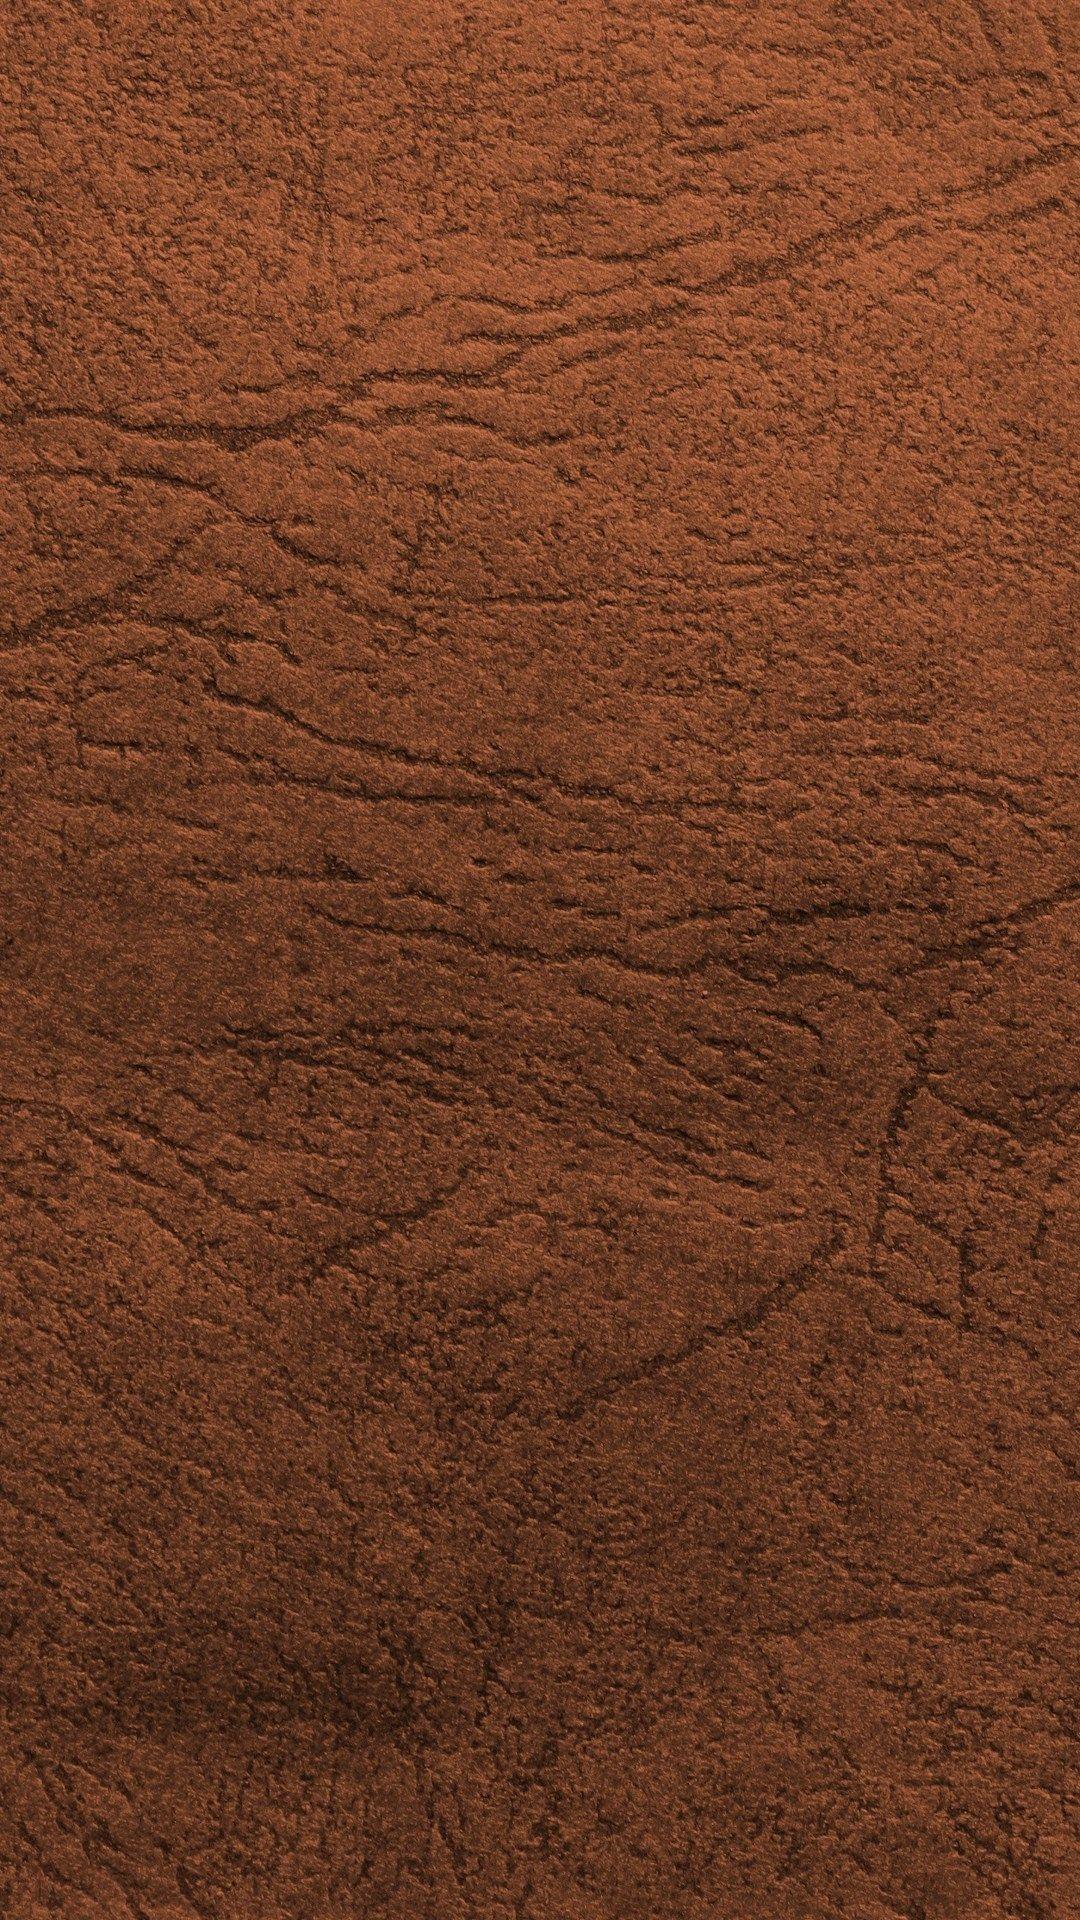 Elephant leather texture 1080P, 2K, 4K, 5K HD wallpapers free download |  Wallpaper Flare